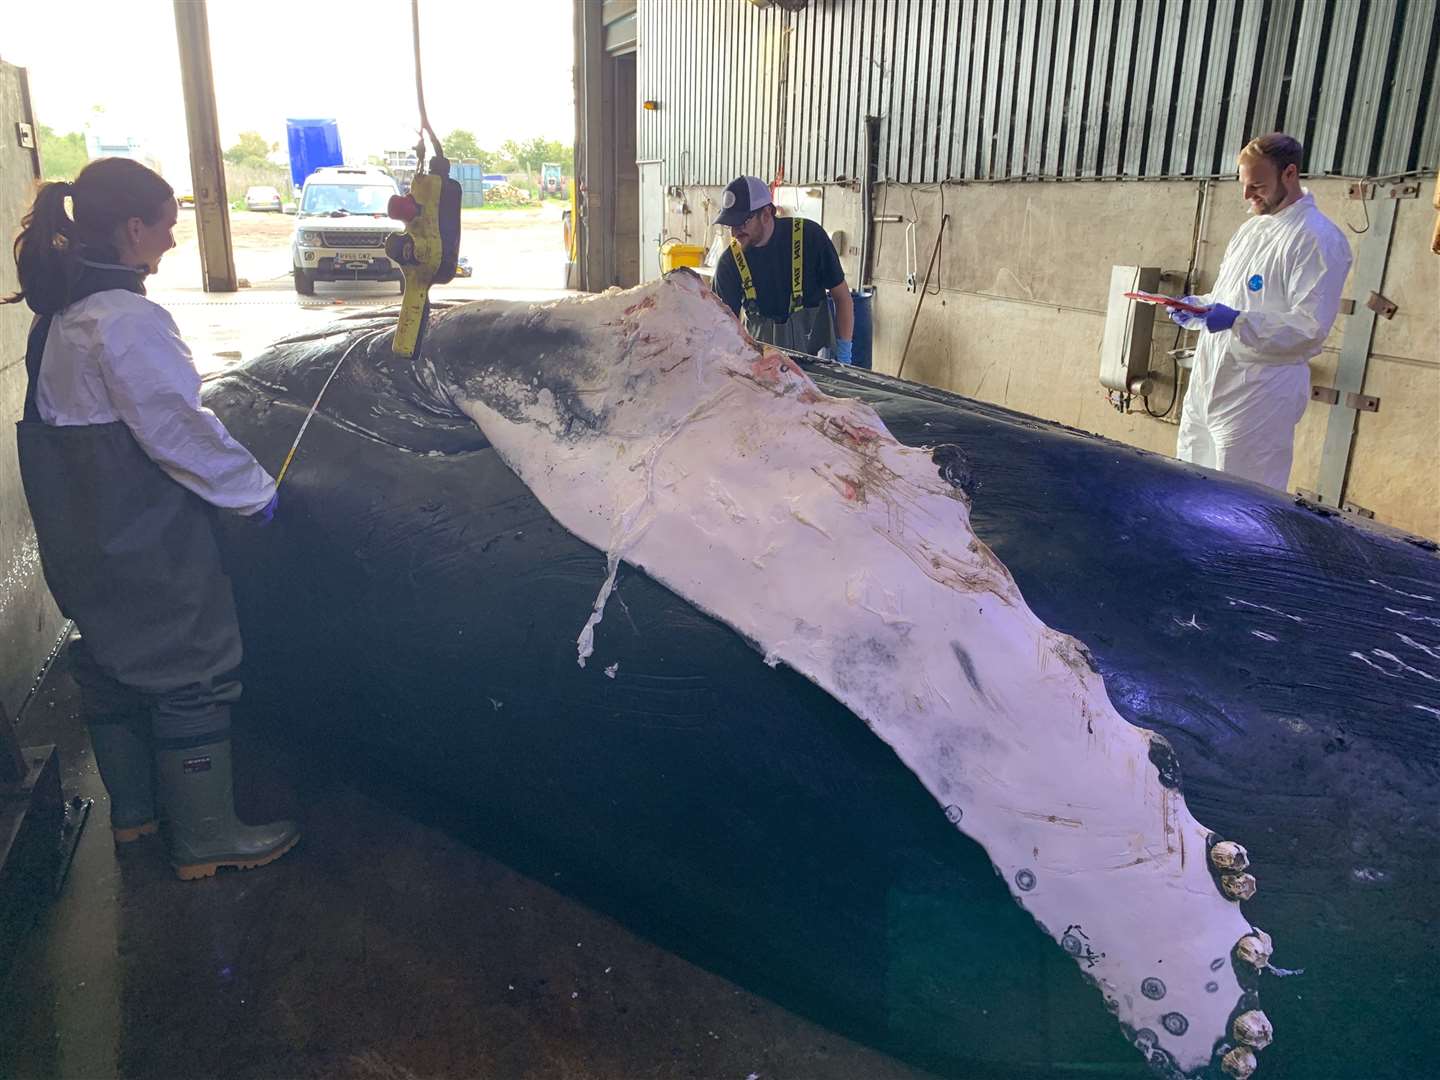 ZSL Cetacean Stranding Investigation Programme examining the deceased humpback whale body. Picture: Rob Deaville (19055675)